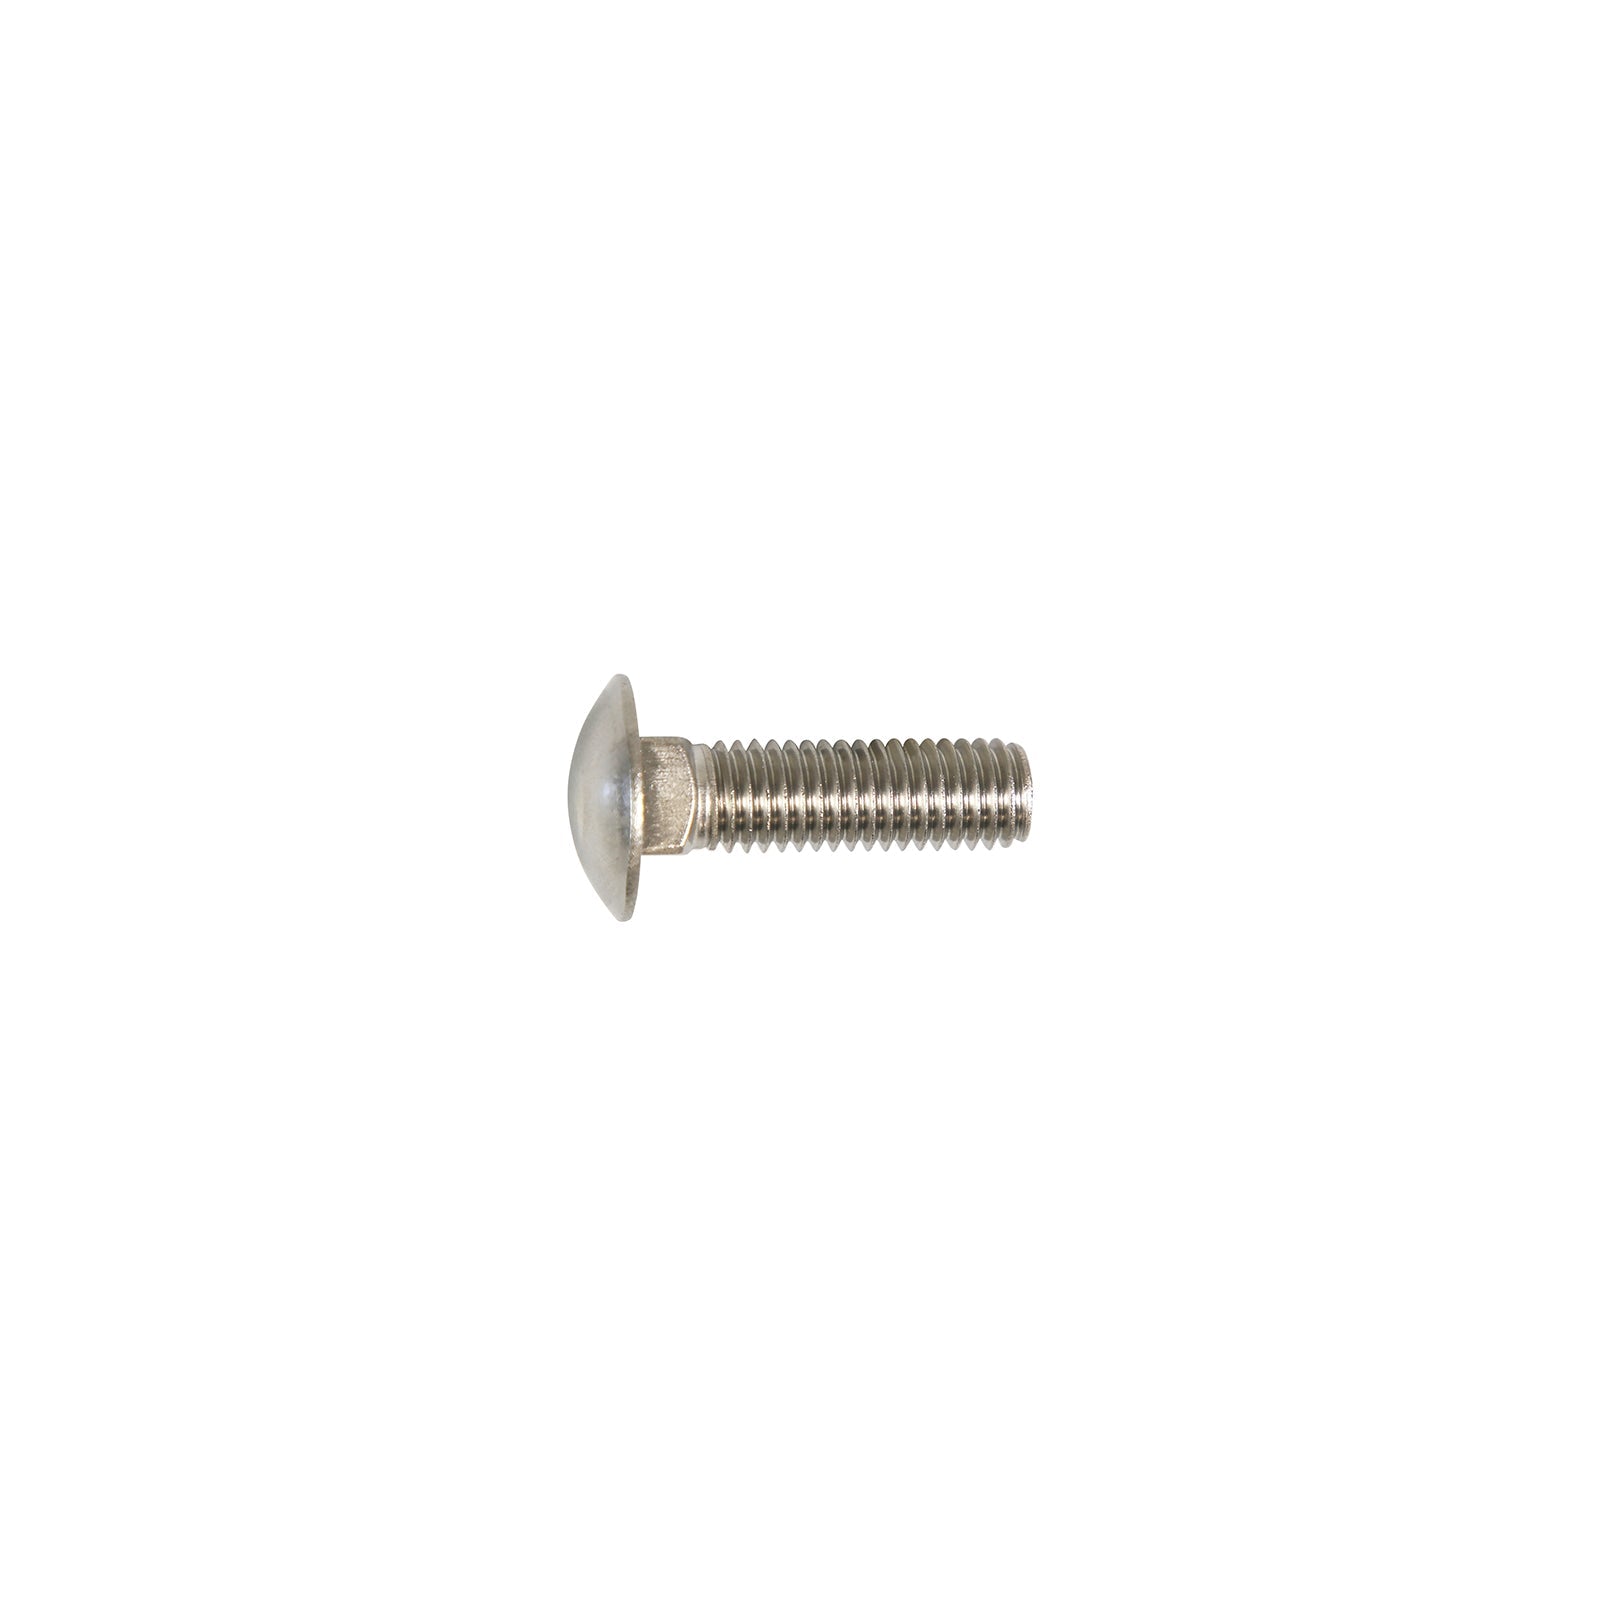 1/2"-13 x 1-3/4" Conquest Carriage Bolt - 304 Stainless Steel